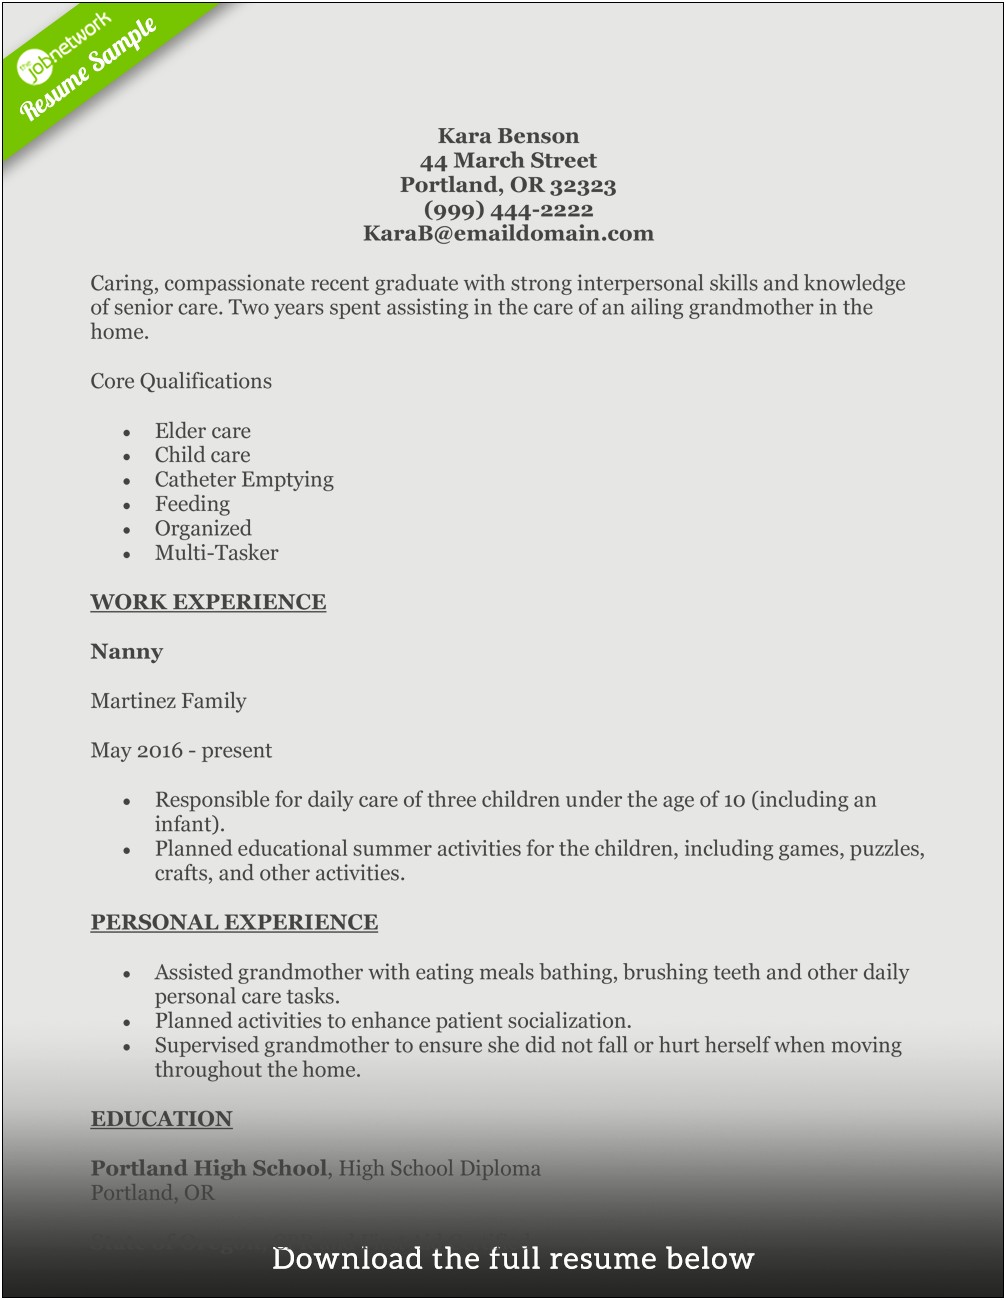 Skills For Dietary Aide Resume